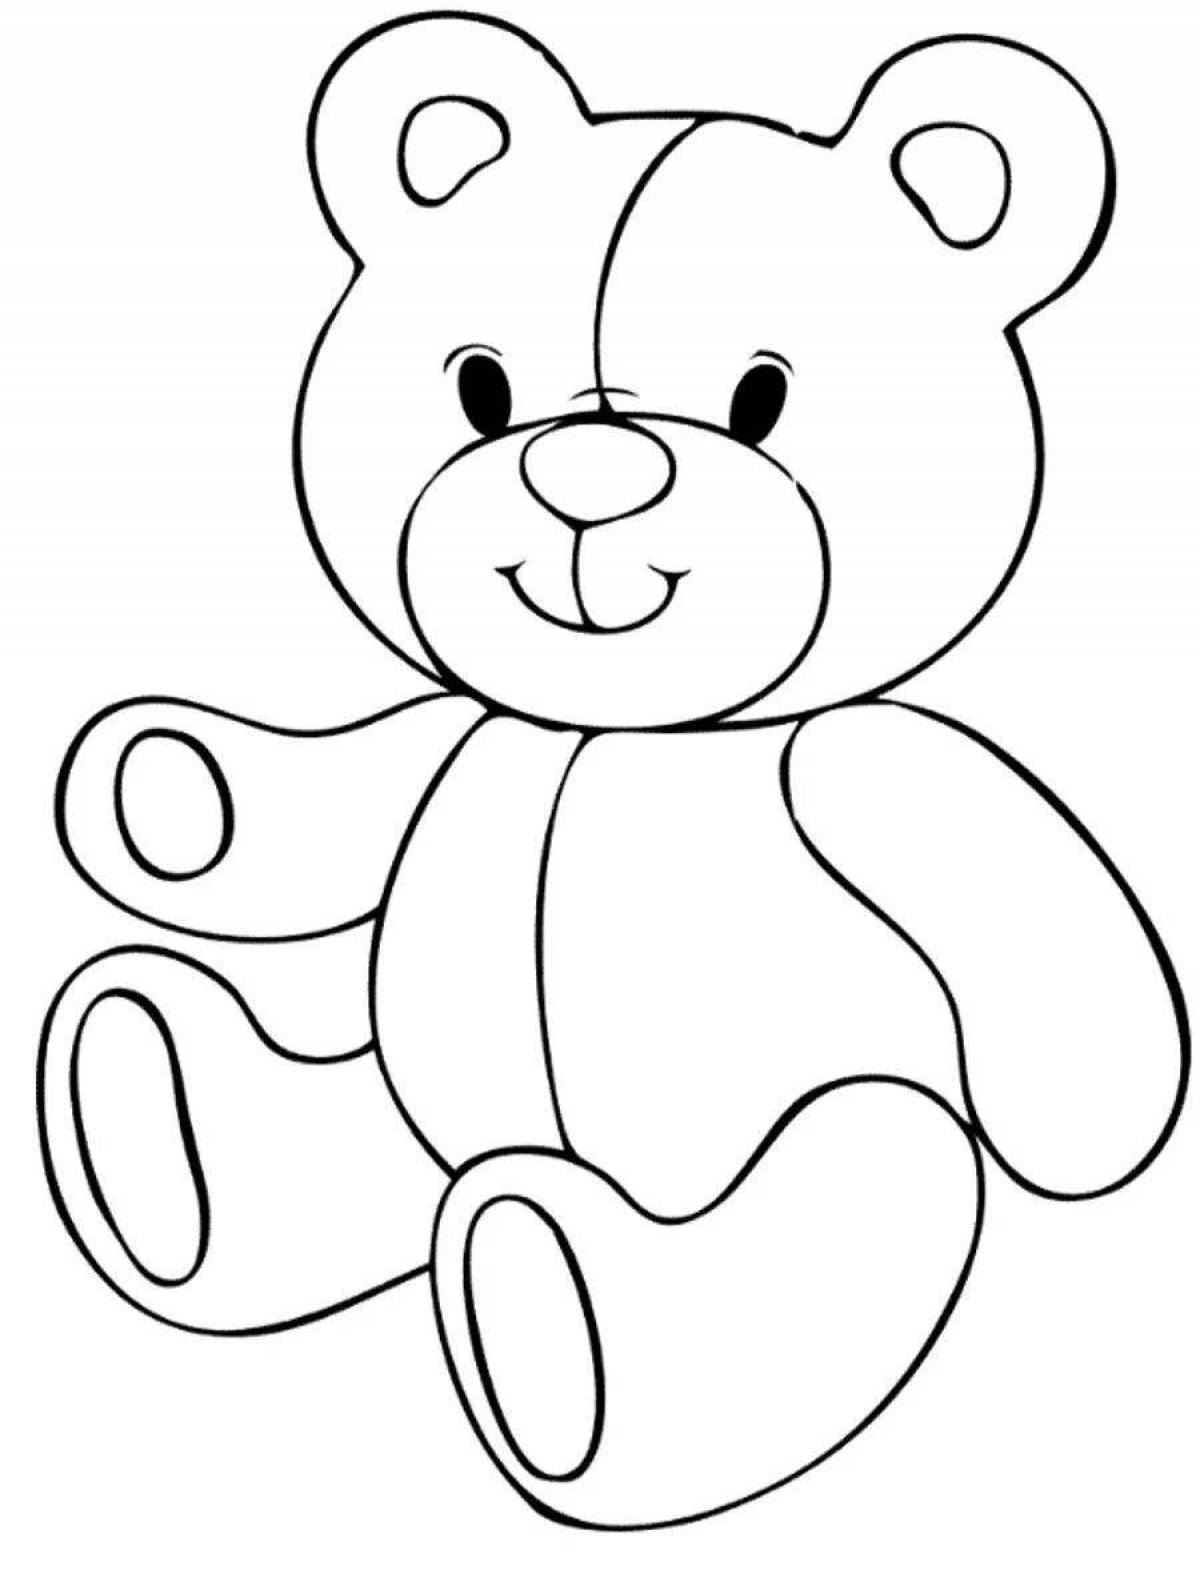 Coloring explosion of color draw coloring pages